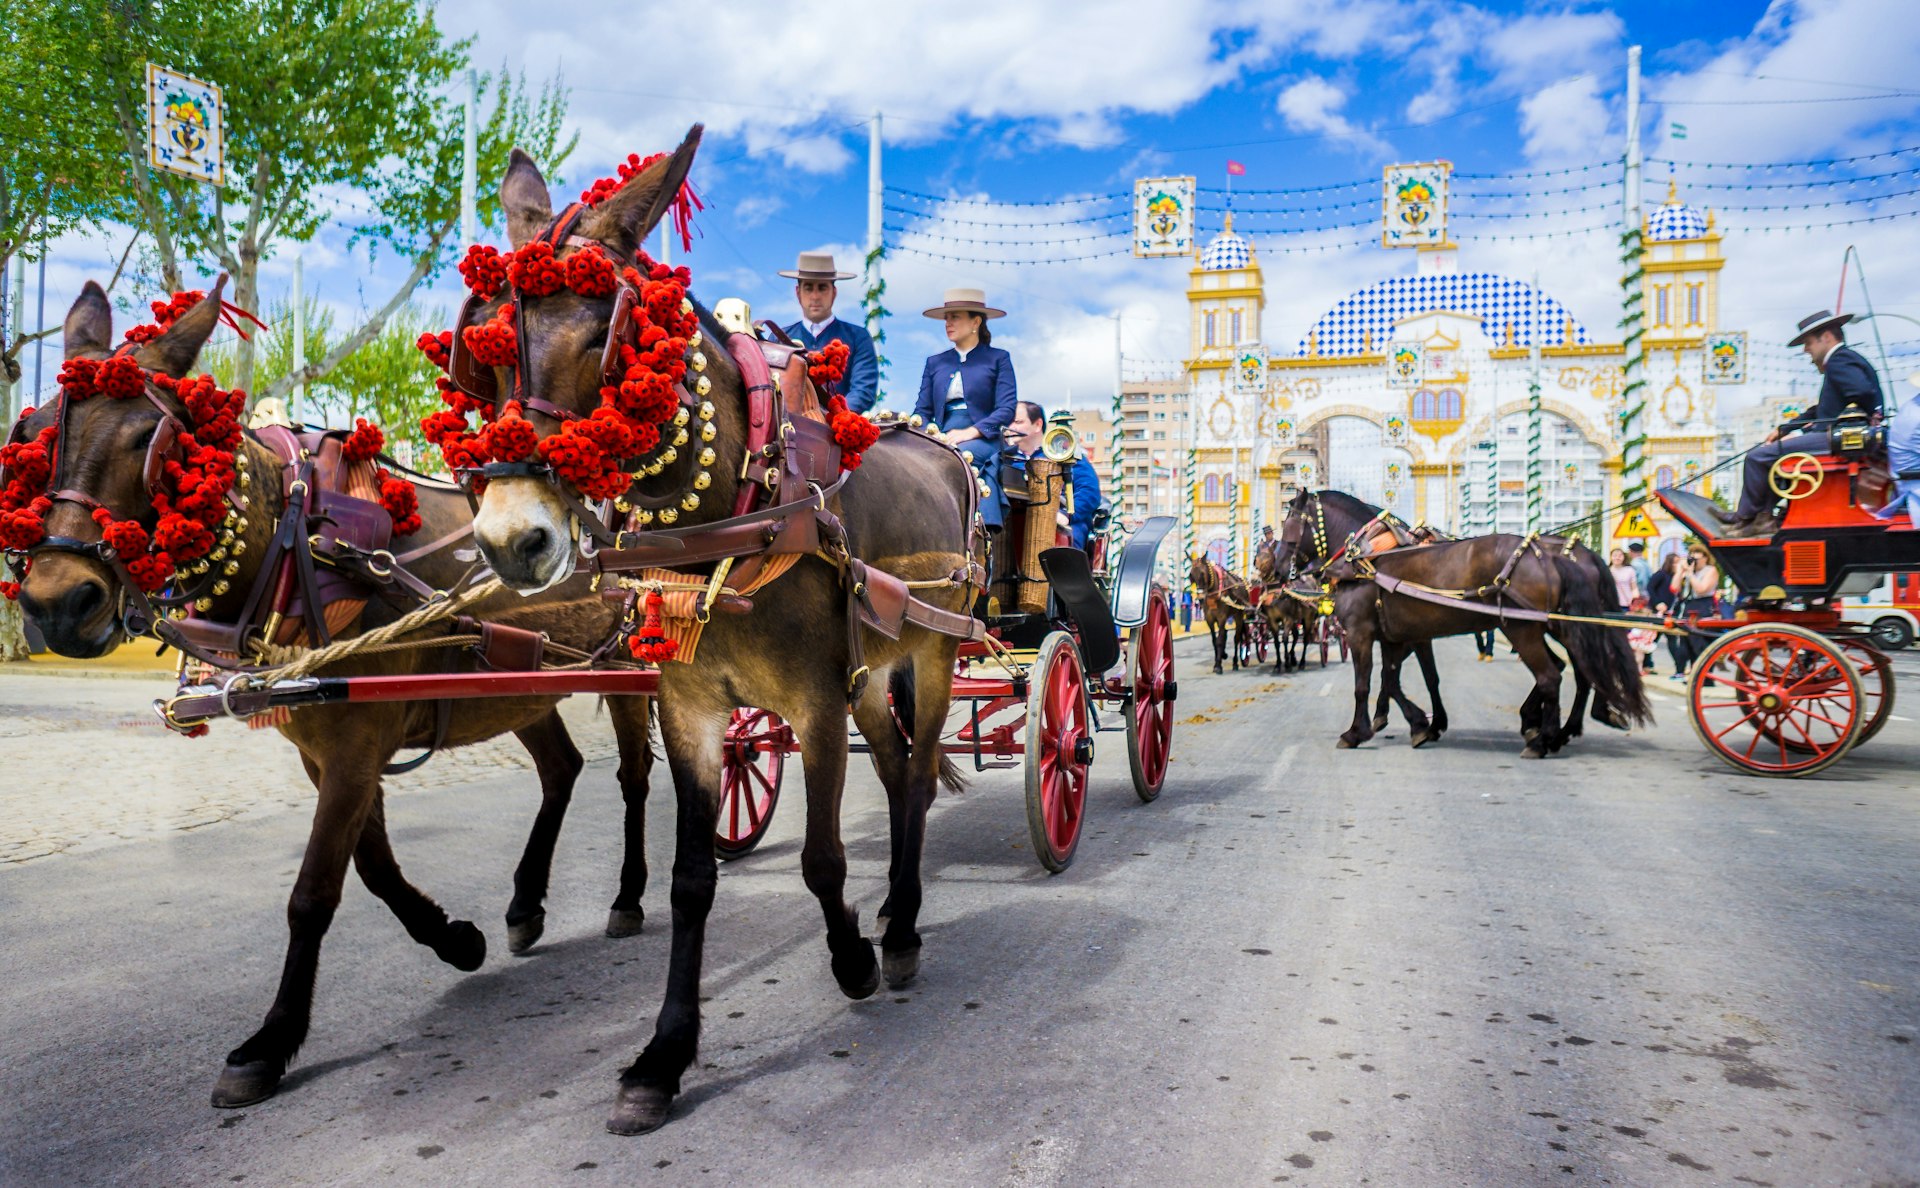 Carriage with horses and people in traditional costume at the April Fair (Feria de Abril). 